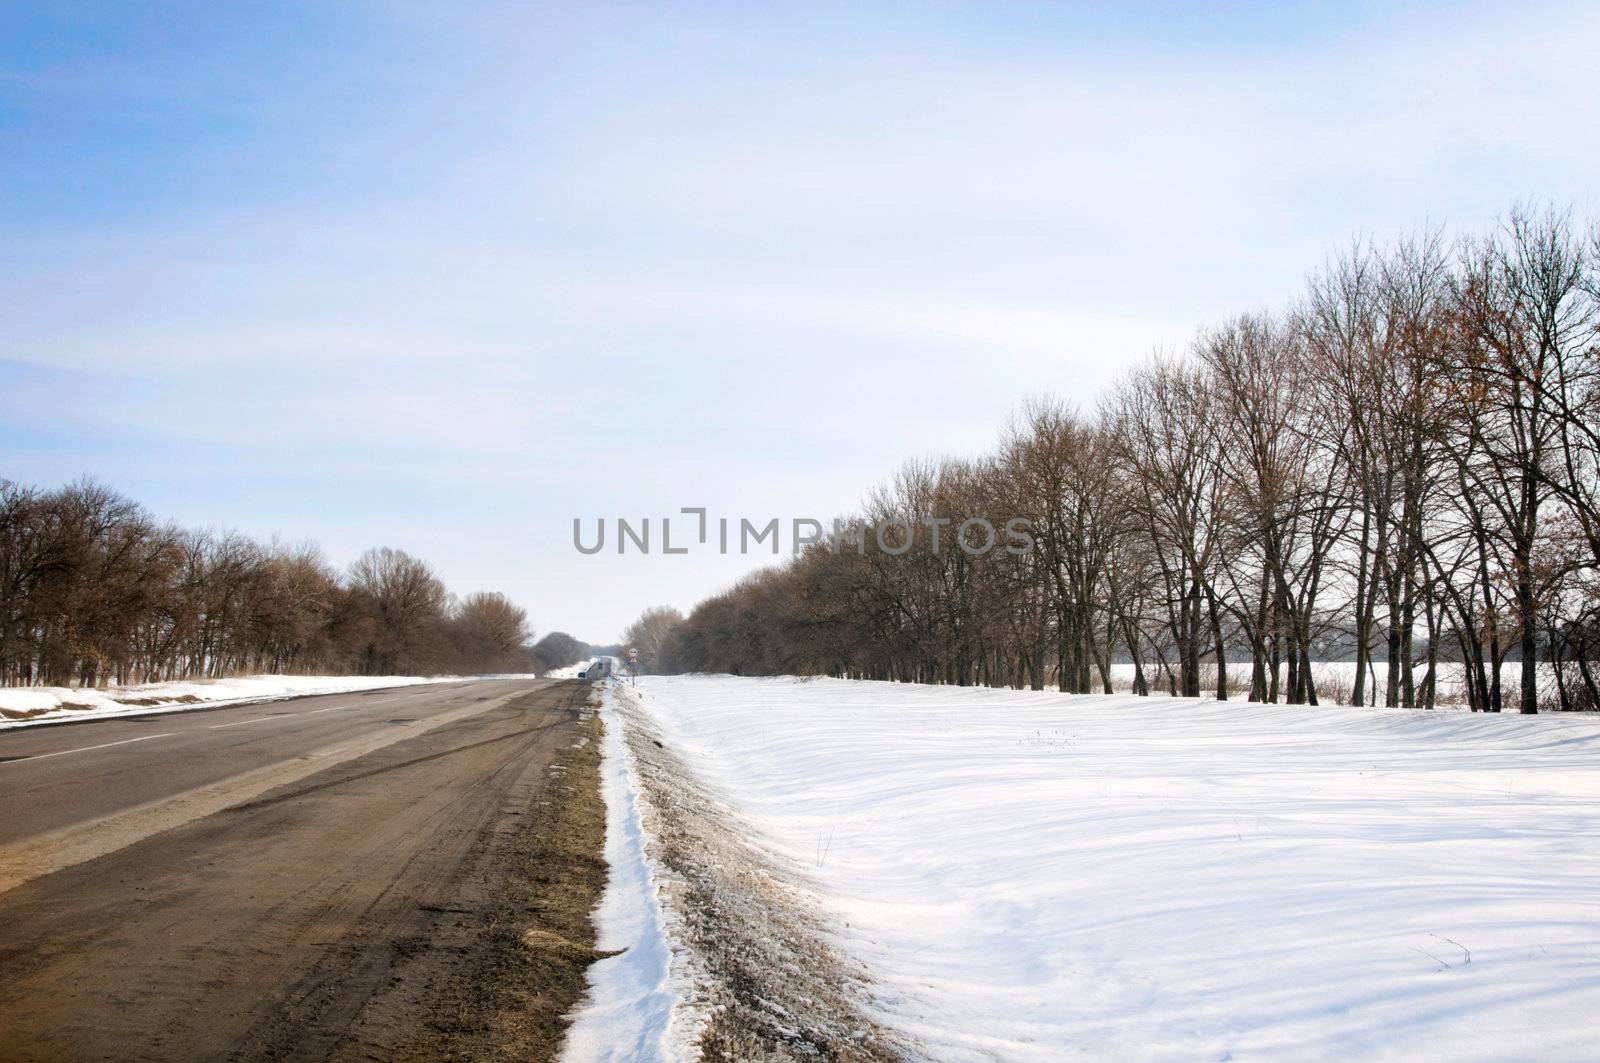 Winter road in the country in Ukraine with blue sky and bare trees along the track